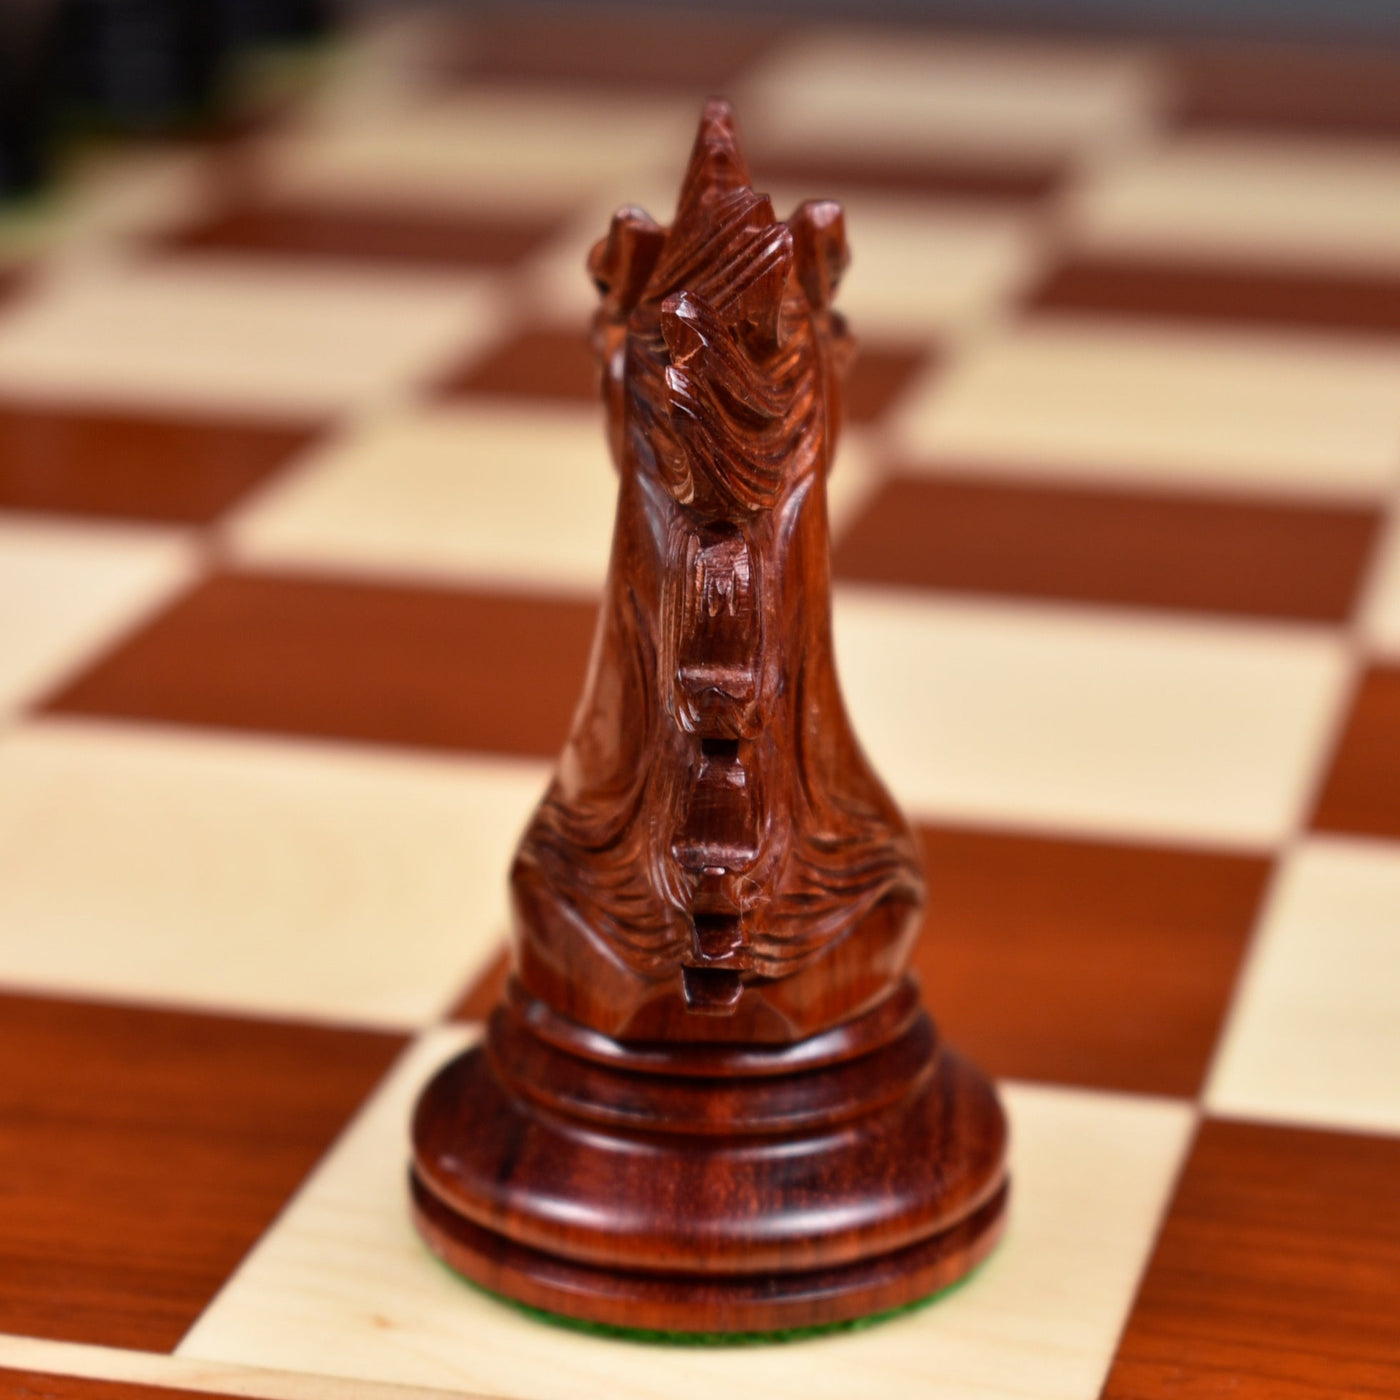 Alexandria Luxury Staunton Chess Set - Chess Pieces Only - Triple Weighted - Ebony & Bud Rosewood